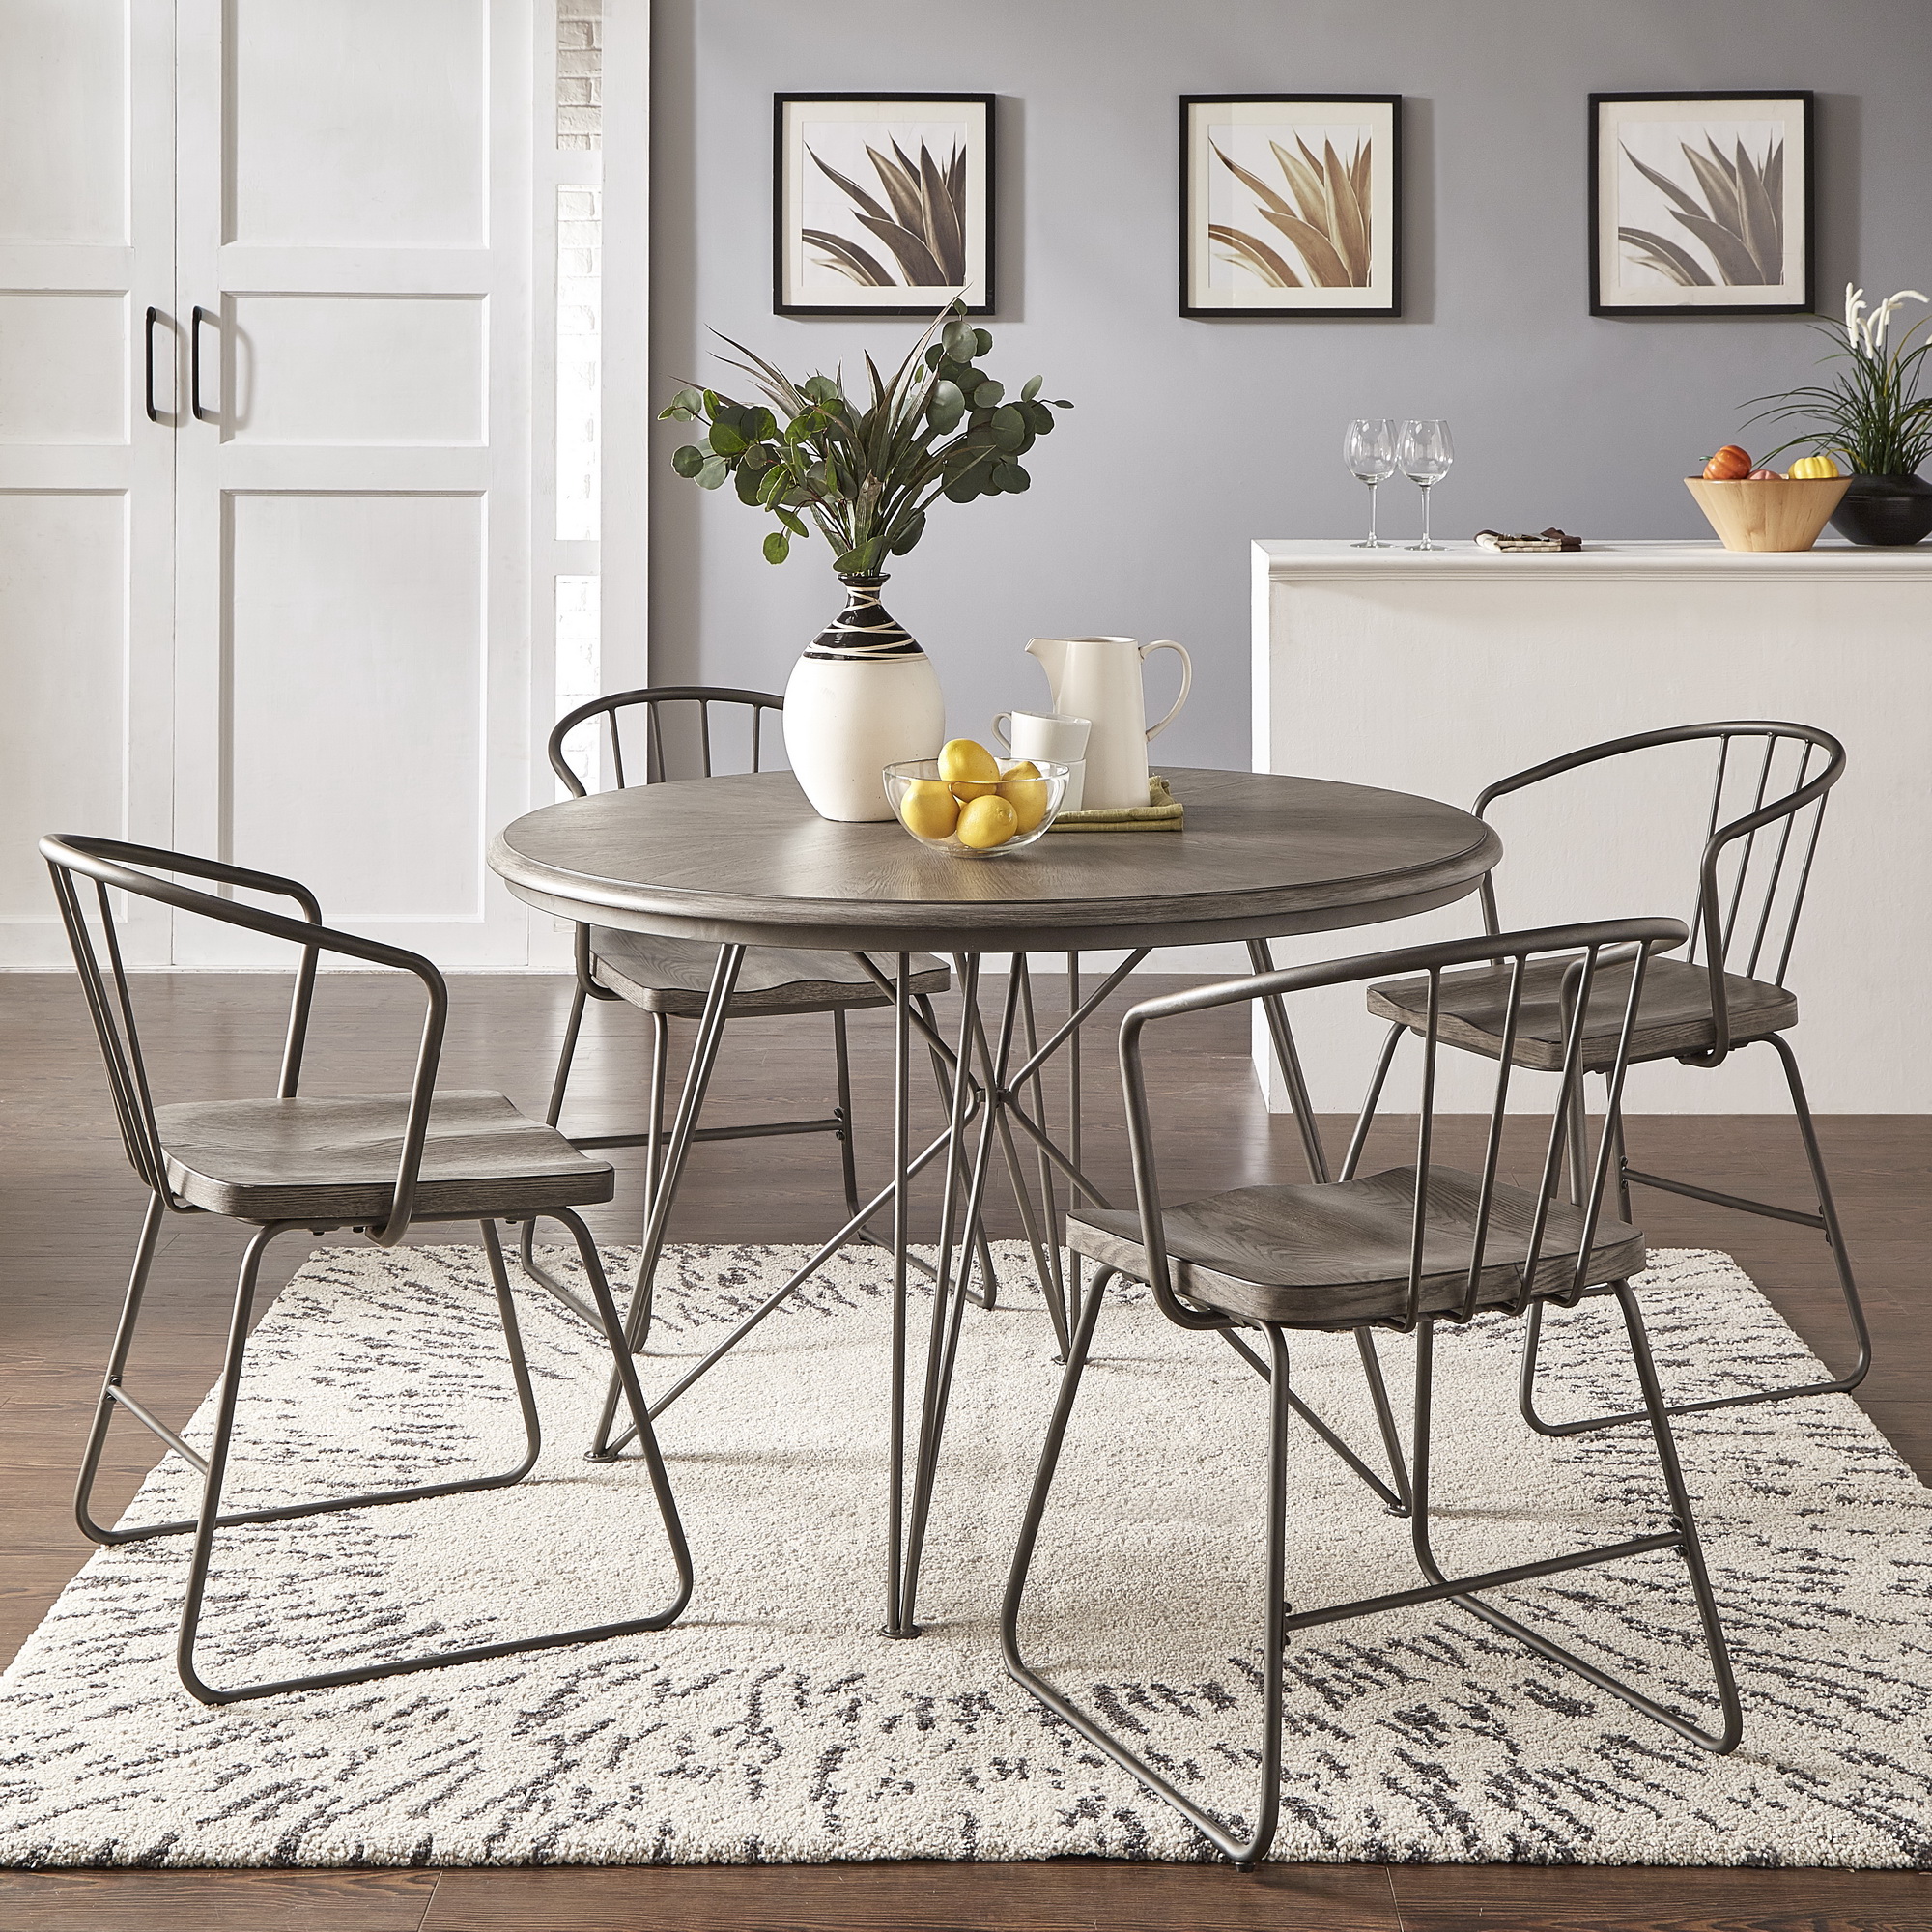 The other metal most commonly found among furniture materials is iron. Here we have pictured the Iron and Grey Wood Round 5-Piece Dining Set by iNSPIRE Q Modern. This set includes a round dining table with a grey wood table top and iron pedestal base. The four matching chairs have grey wood seats and iron frames.